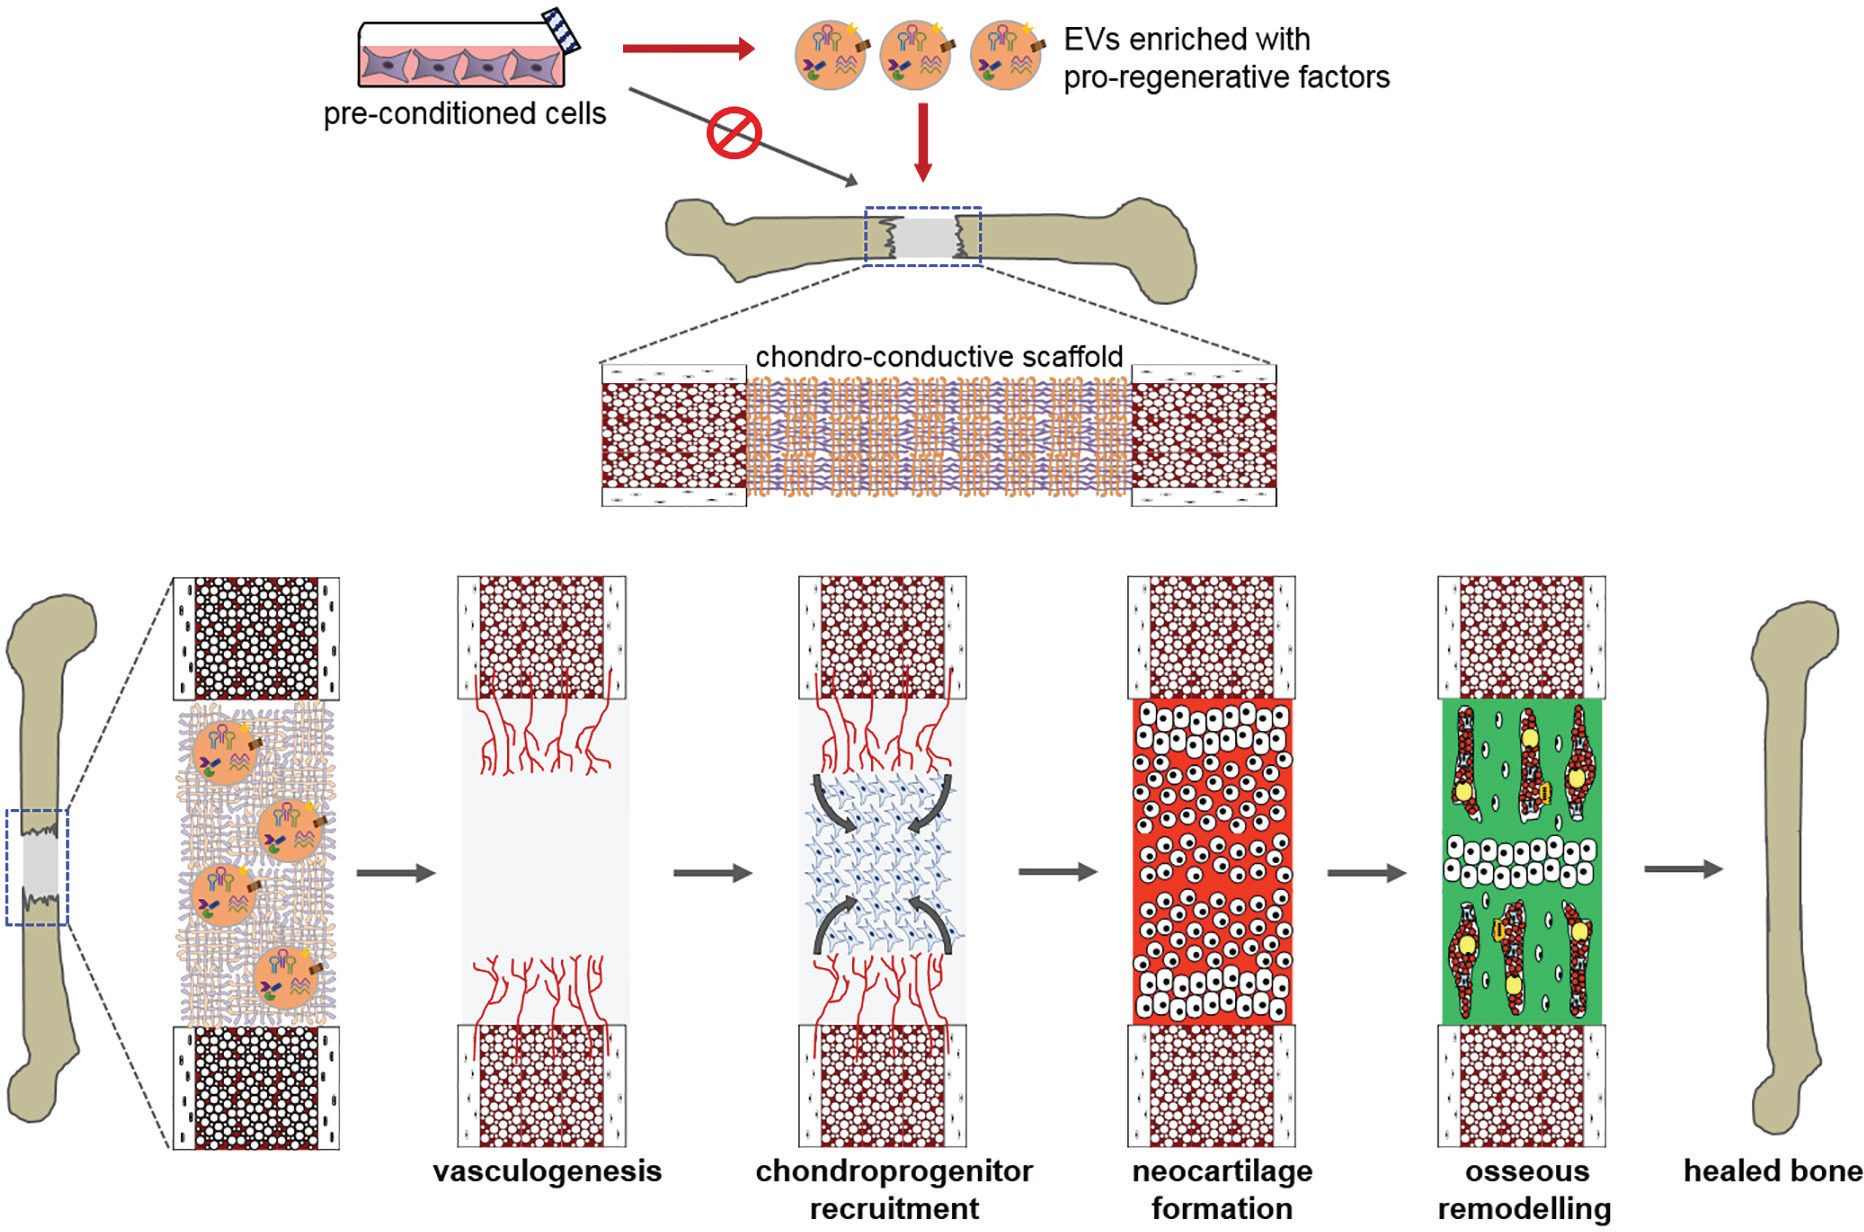 Fig. 4 
          Diagram showing therapeutic targets for endochondral repair. Bottlenecks to endochondral bone repair include progressive vascularization, chondroprogenitor recruitment, neocartilage formation, and osseous remodelling. It may be possible to deliver extracellular vesicles (EVs) harvested in vitro from promising parent cell cultures that stimulate endogenous cells to overcome one or more of these bottlenecks. An ideal scaffold for this approach would not only be chondro-conductive but would also control the release of therapeutic EVs, in order to match the migration timeframe of target repair cells (endothelial, chondroprogenitor) into the defect.
        